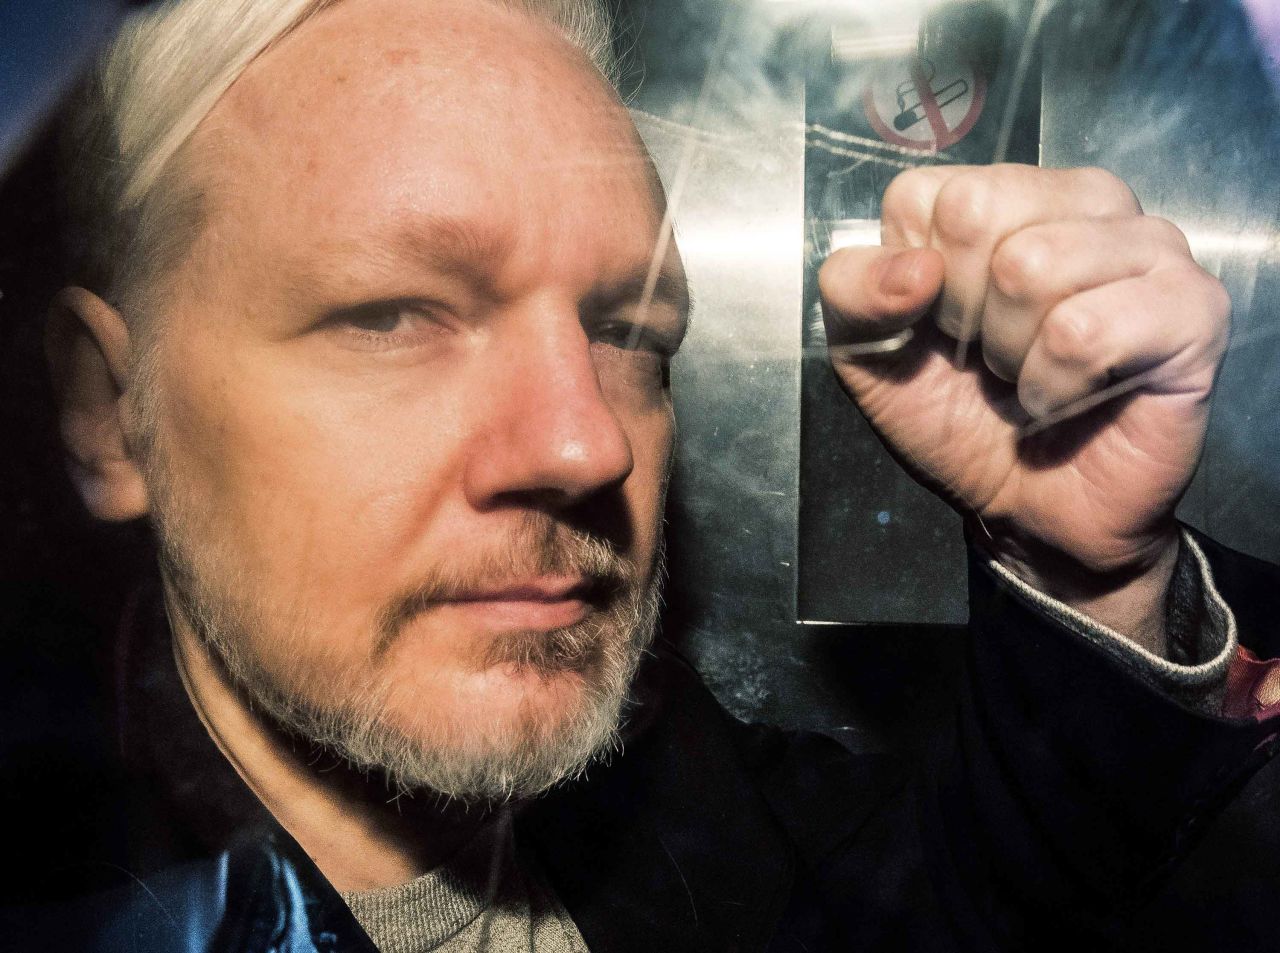 Assange gestures from the window of a prison van as he is driven into Southwark Crown Court in London on May 1, 2019, before being sentenced to 50 weeks in prison for breaching his bail conditions in 2012.